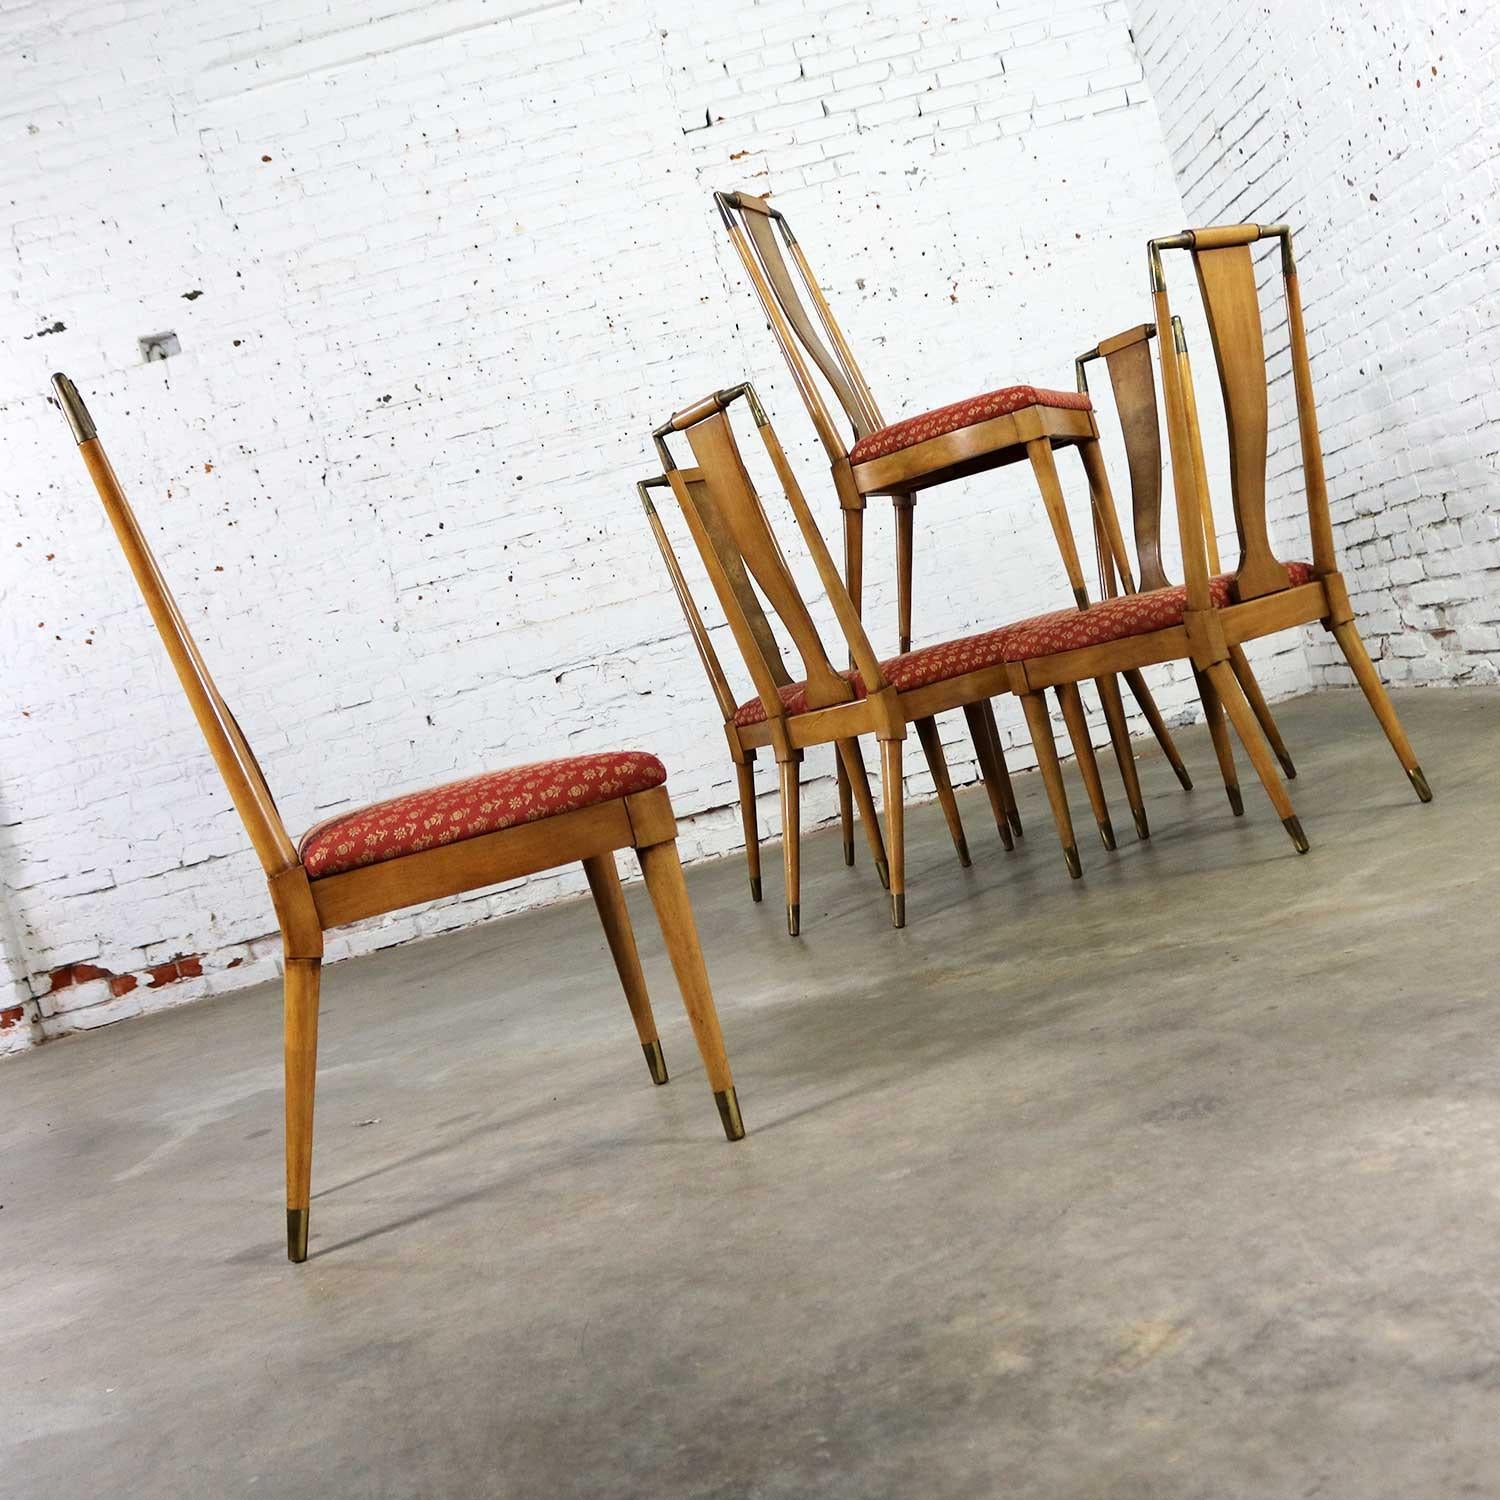 Midcentury Contempora Dining Chairs by William Clingman for J. L. Metz Set of 6 In Good Condition For Sale In Topeka, KS